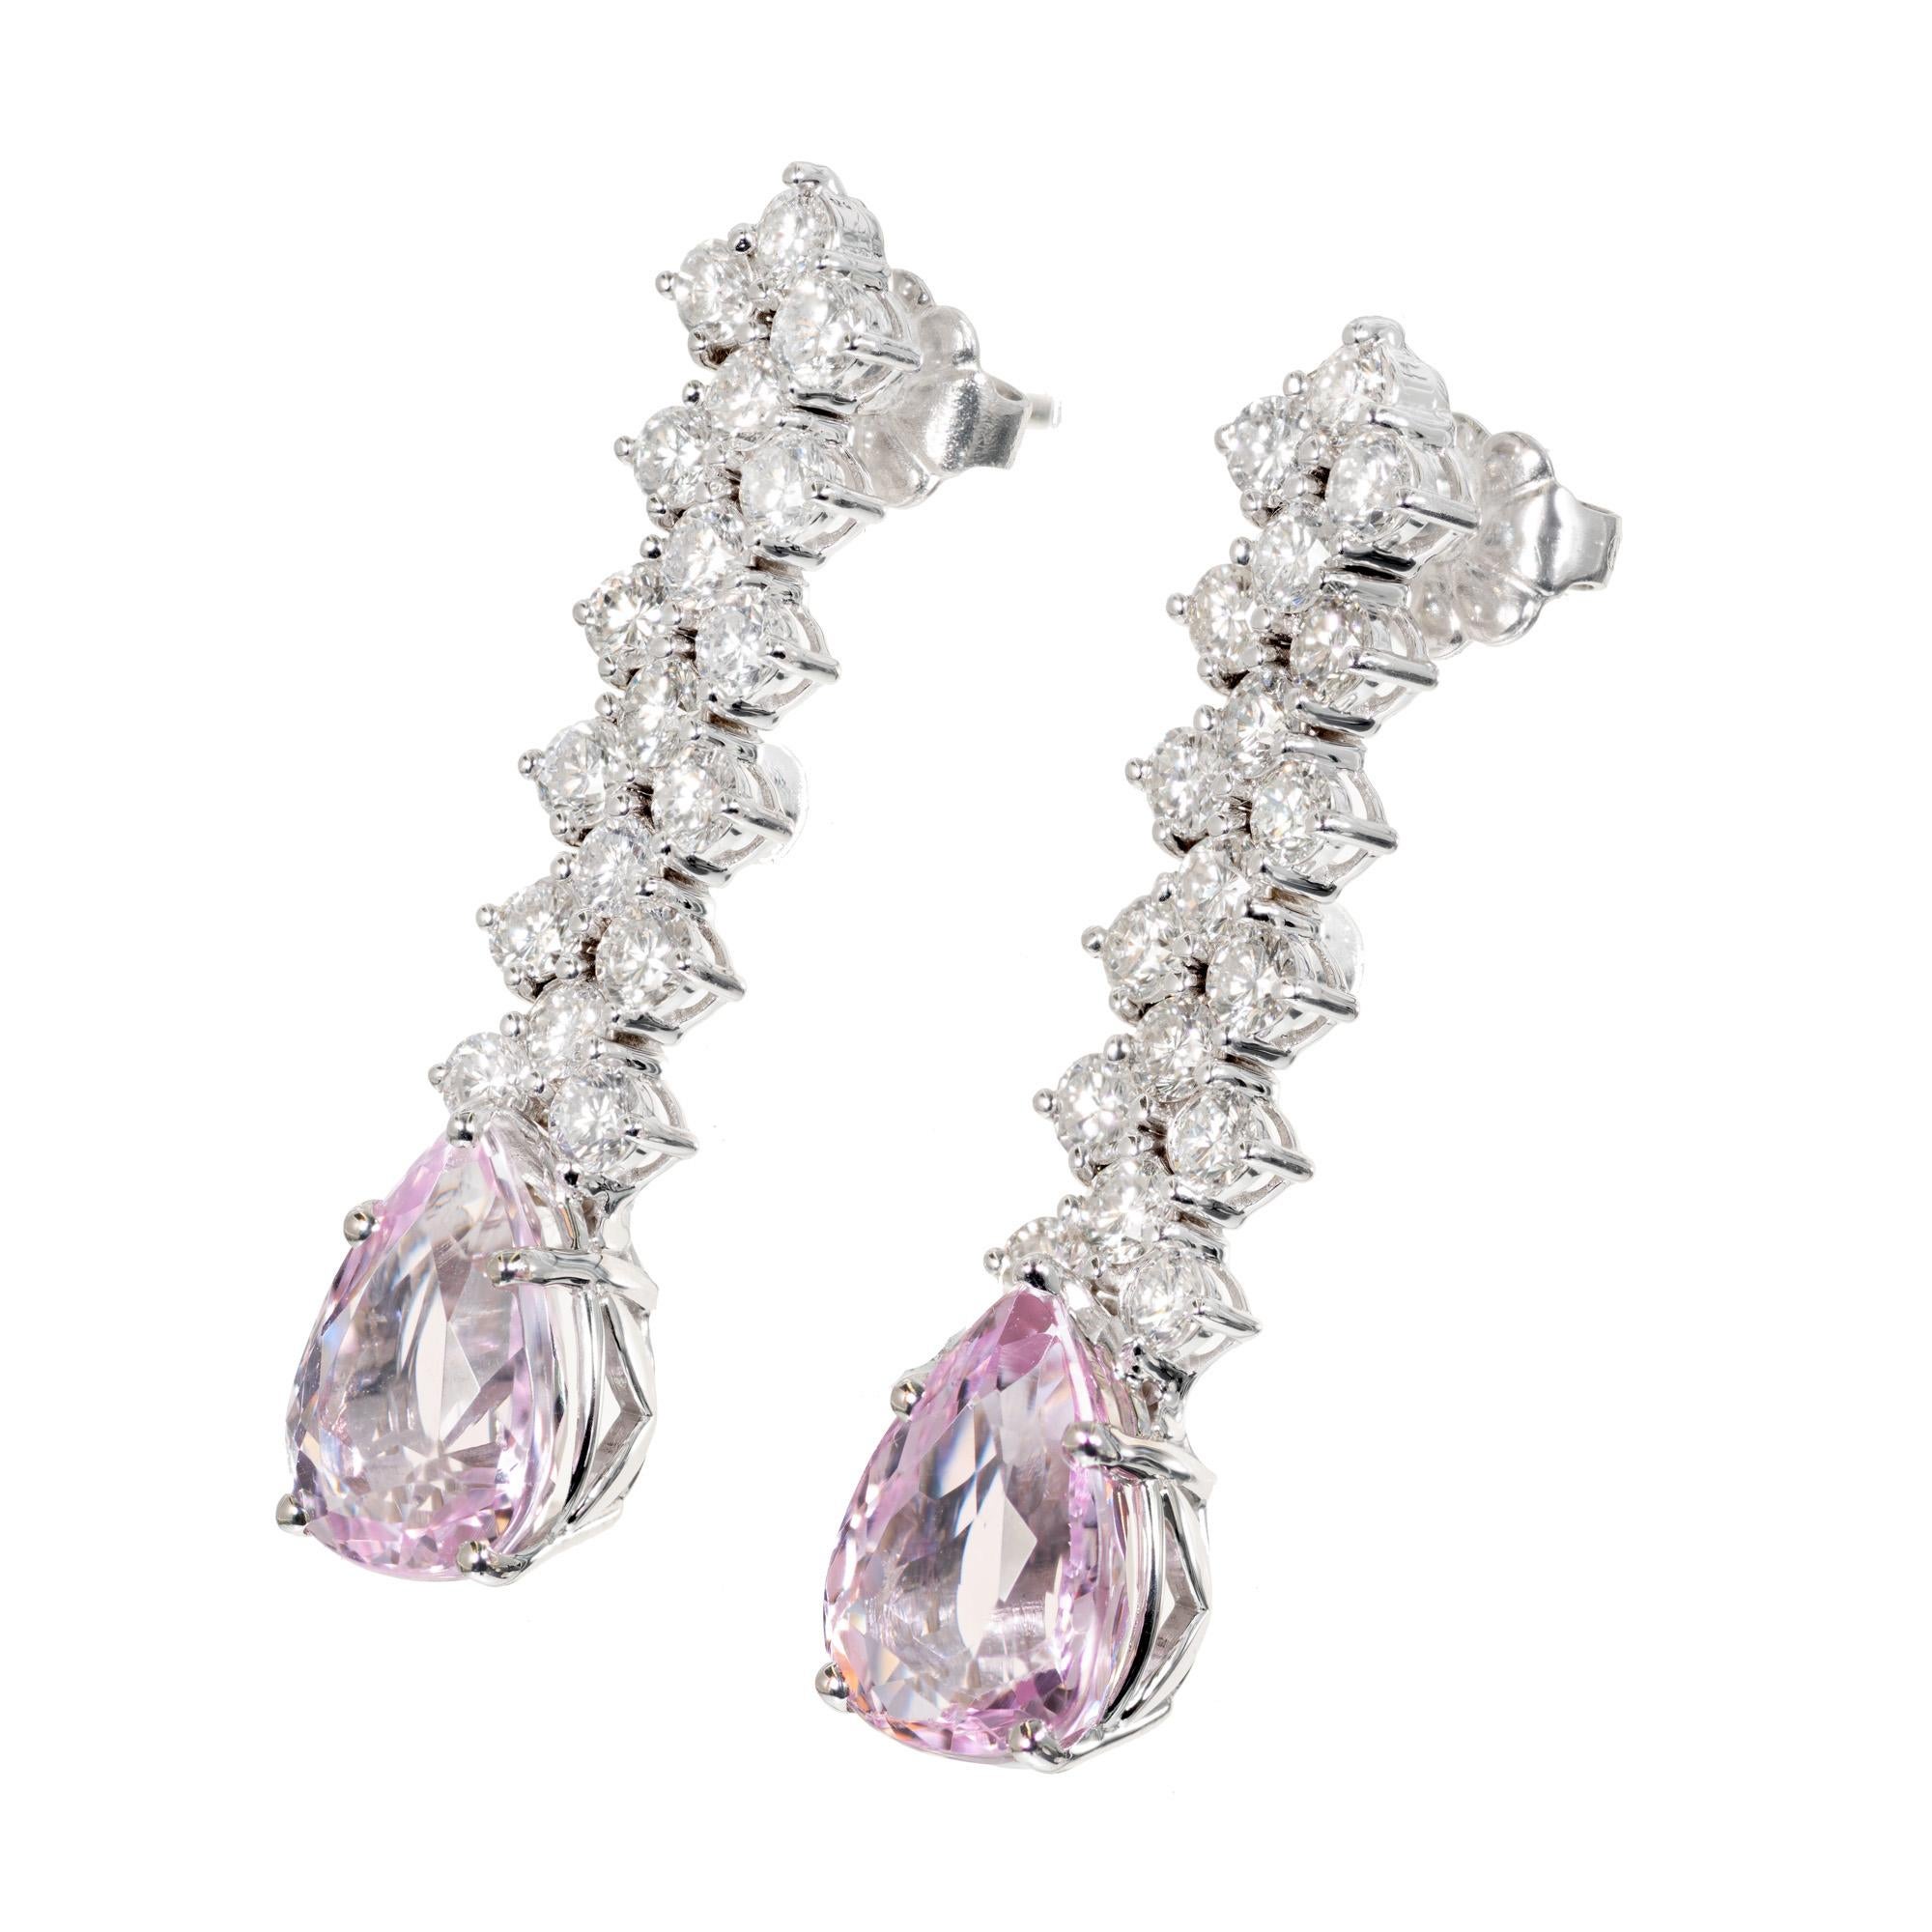 GIA Certified light pink topaz and diamond earrings. Flexible rows of bright white full cut diamonds and a matched pair of light pink pear shape topaz in 18k white gold 

1 pear shape light pink topaz VA, approx. 2.77cts GIA Certificate #